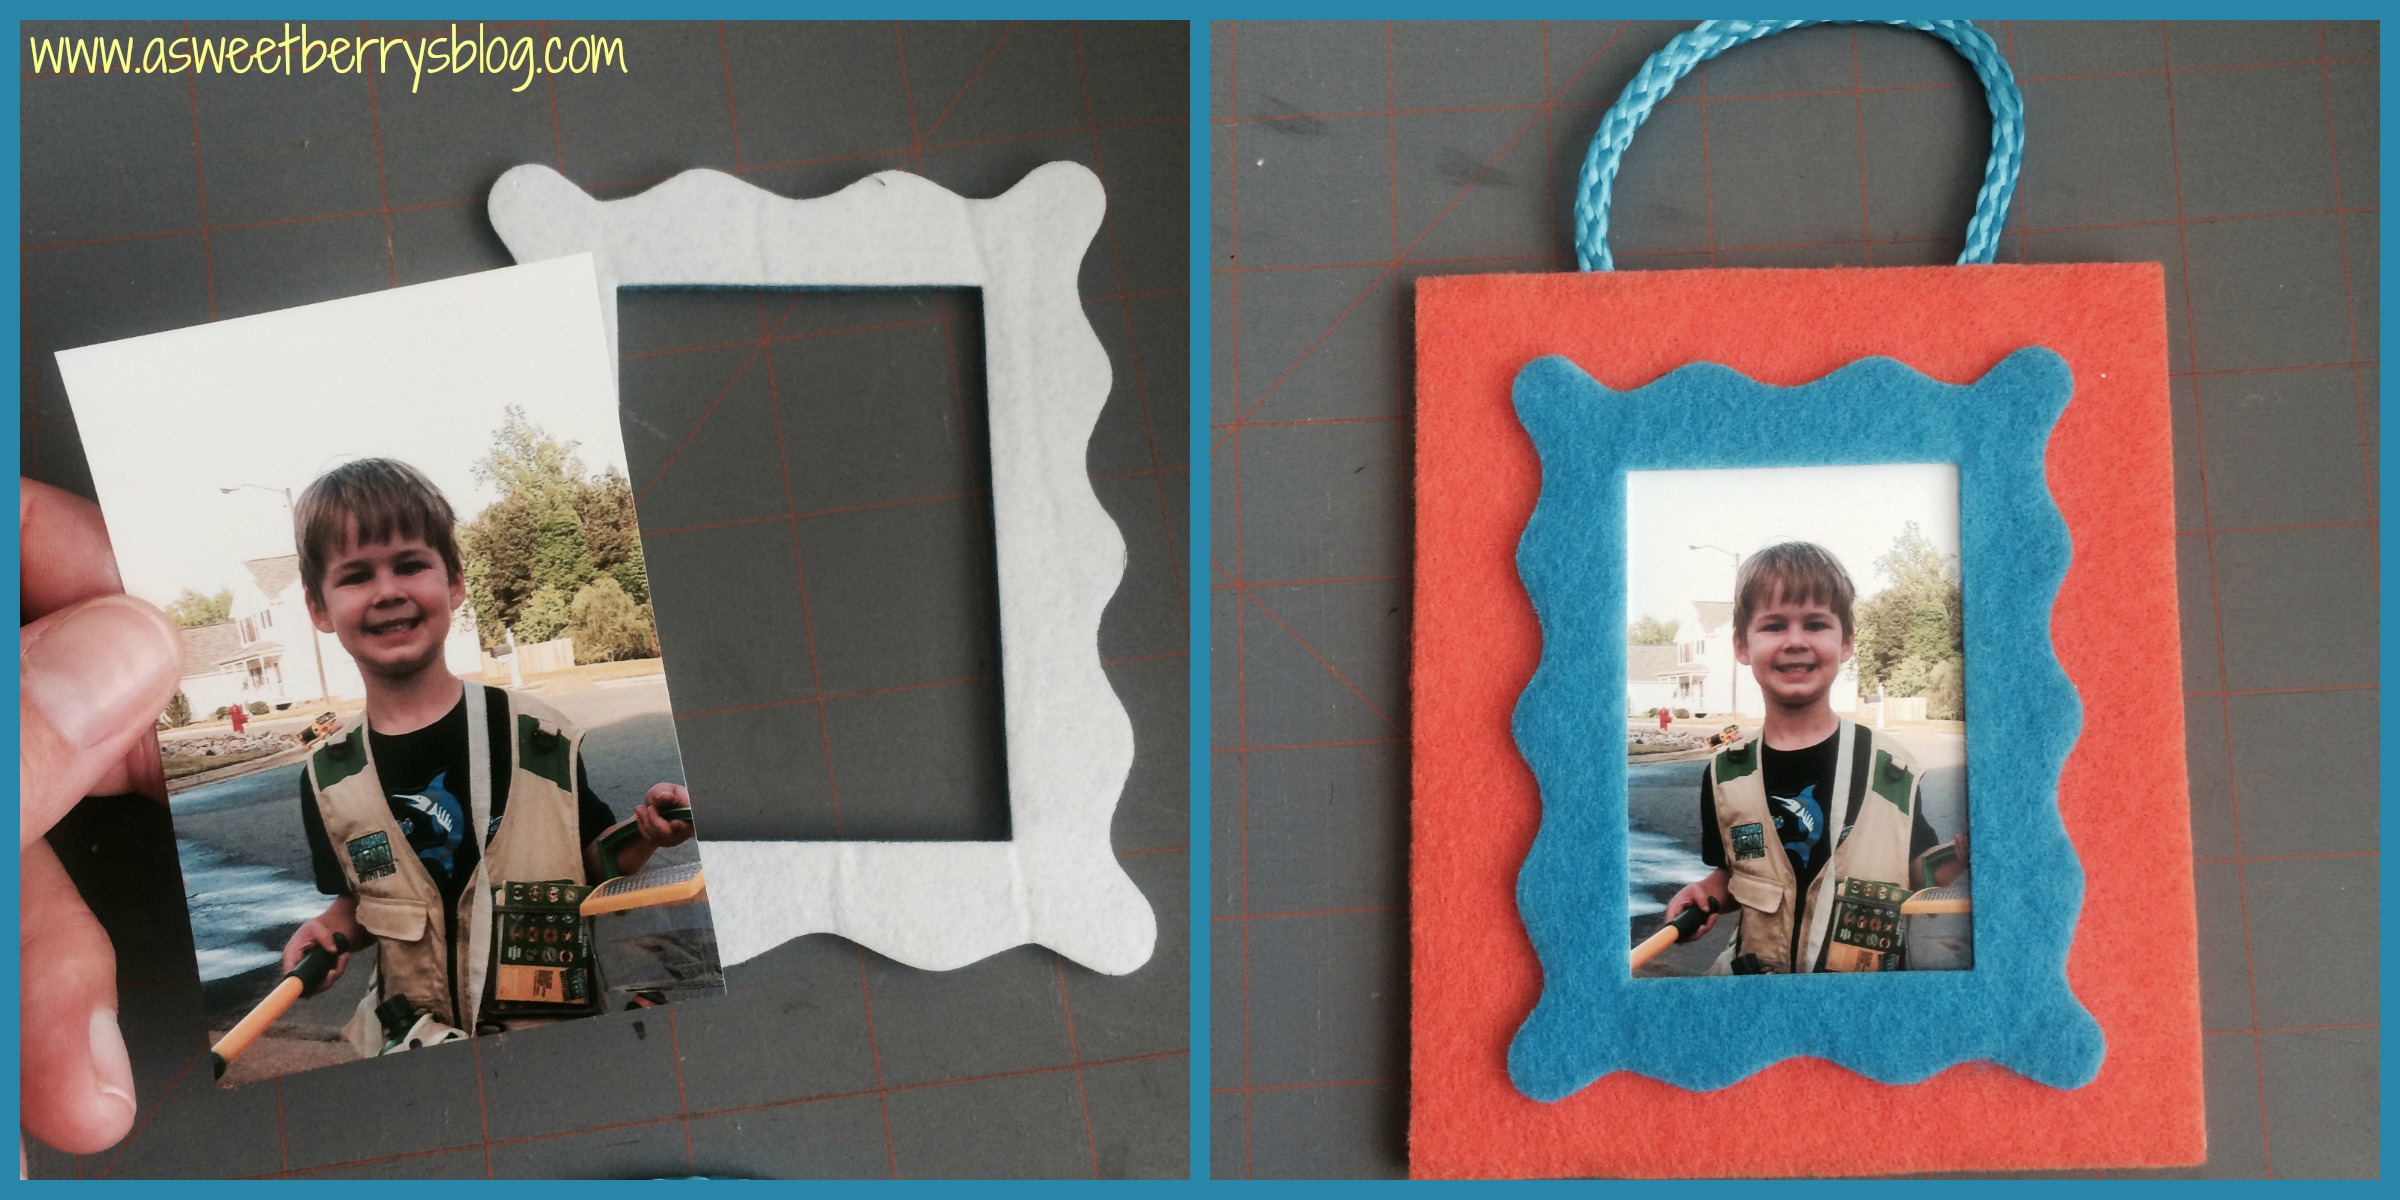 How to Use Printable Fabric in Embroidered Frames – Sweet Pea Blog